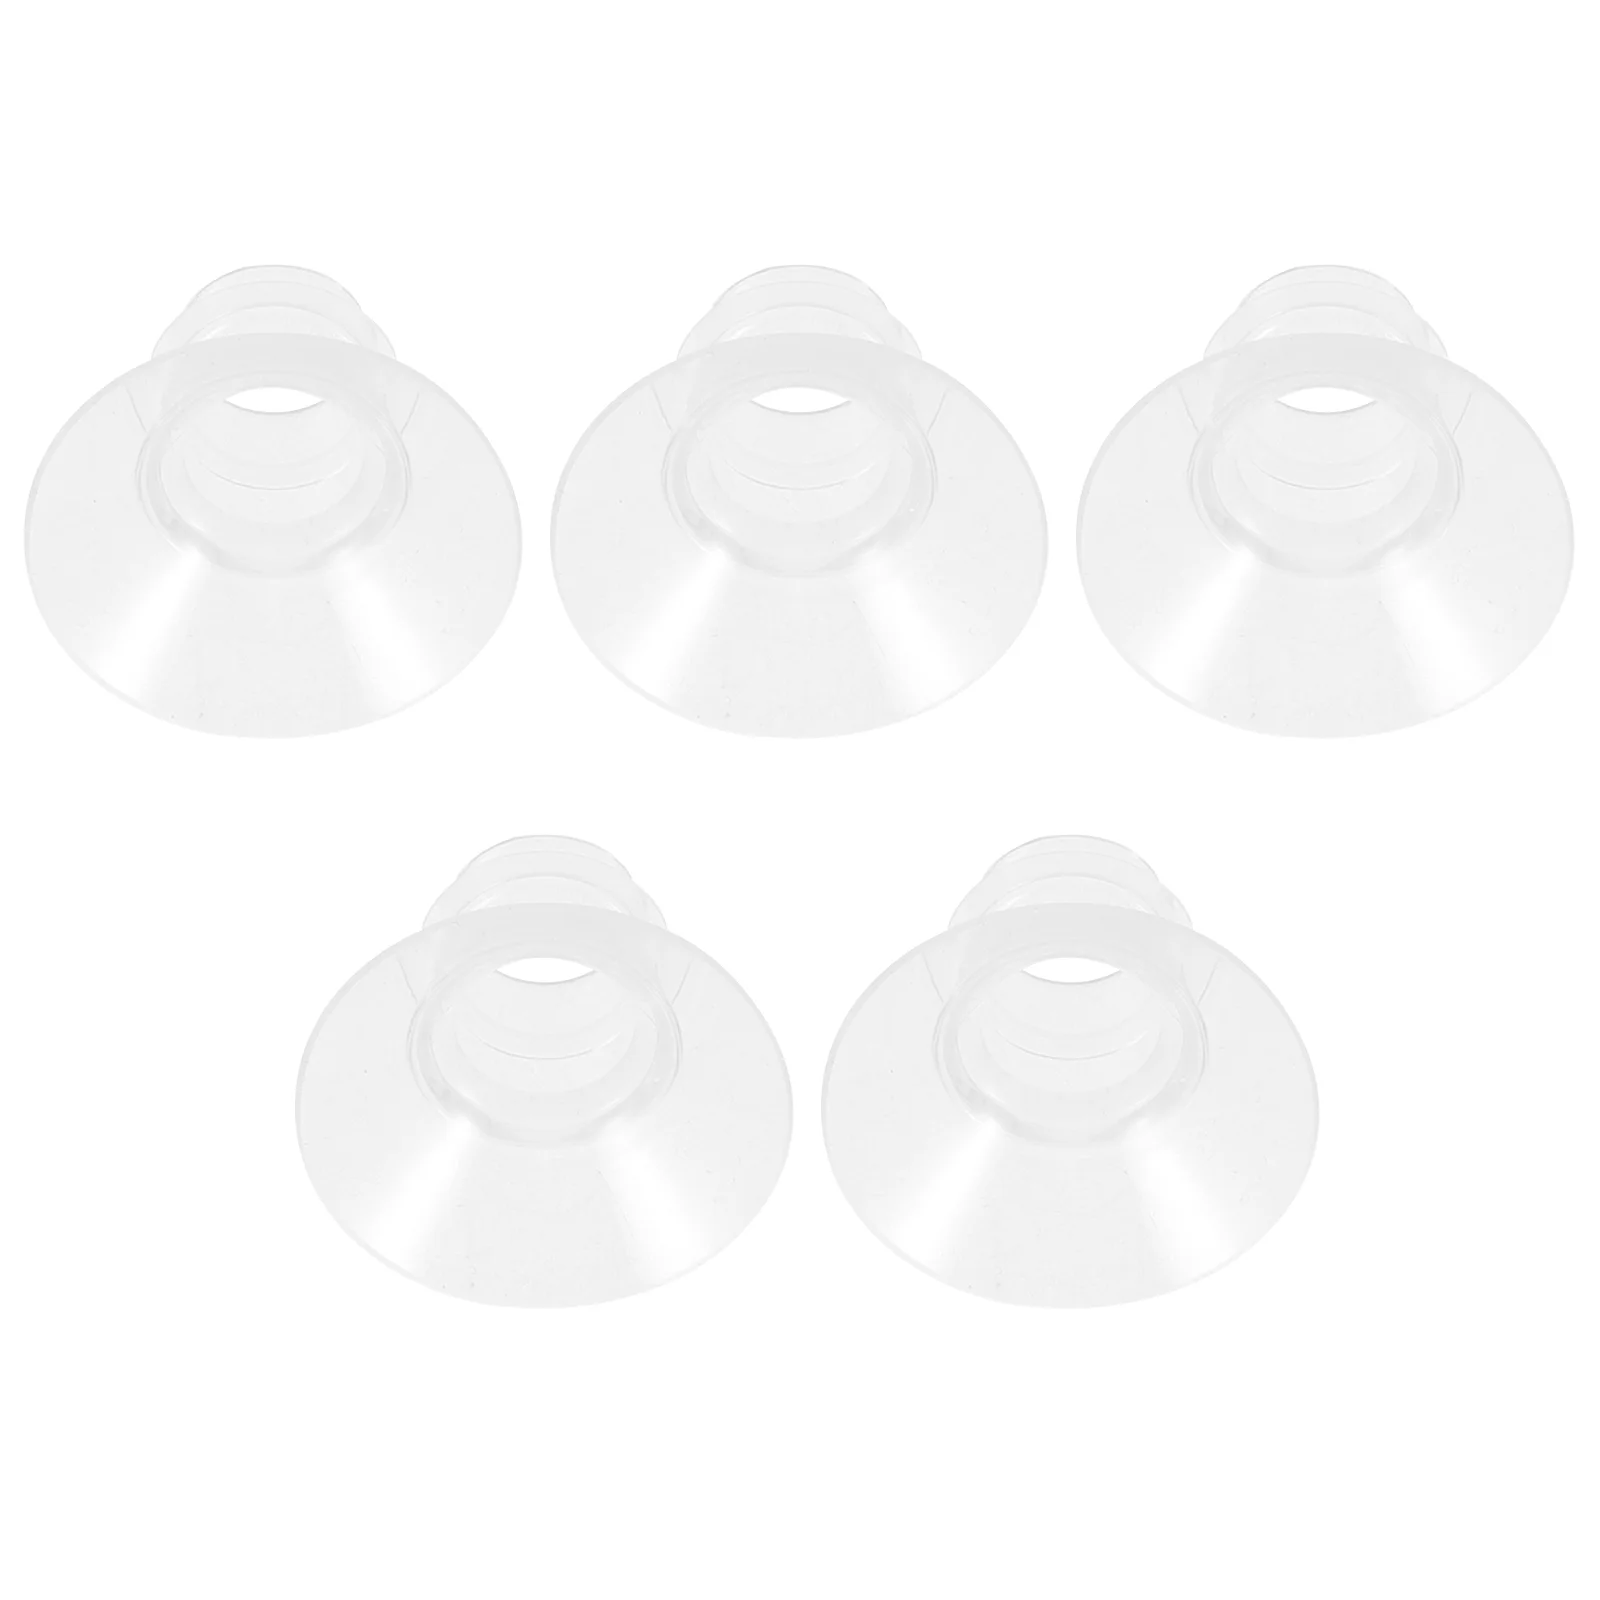 

21mm Flange Insert Inserts 17mm Wearable Breast Pump Accessories Universal Replacement Parts Mom Cozy Pumps